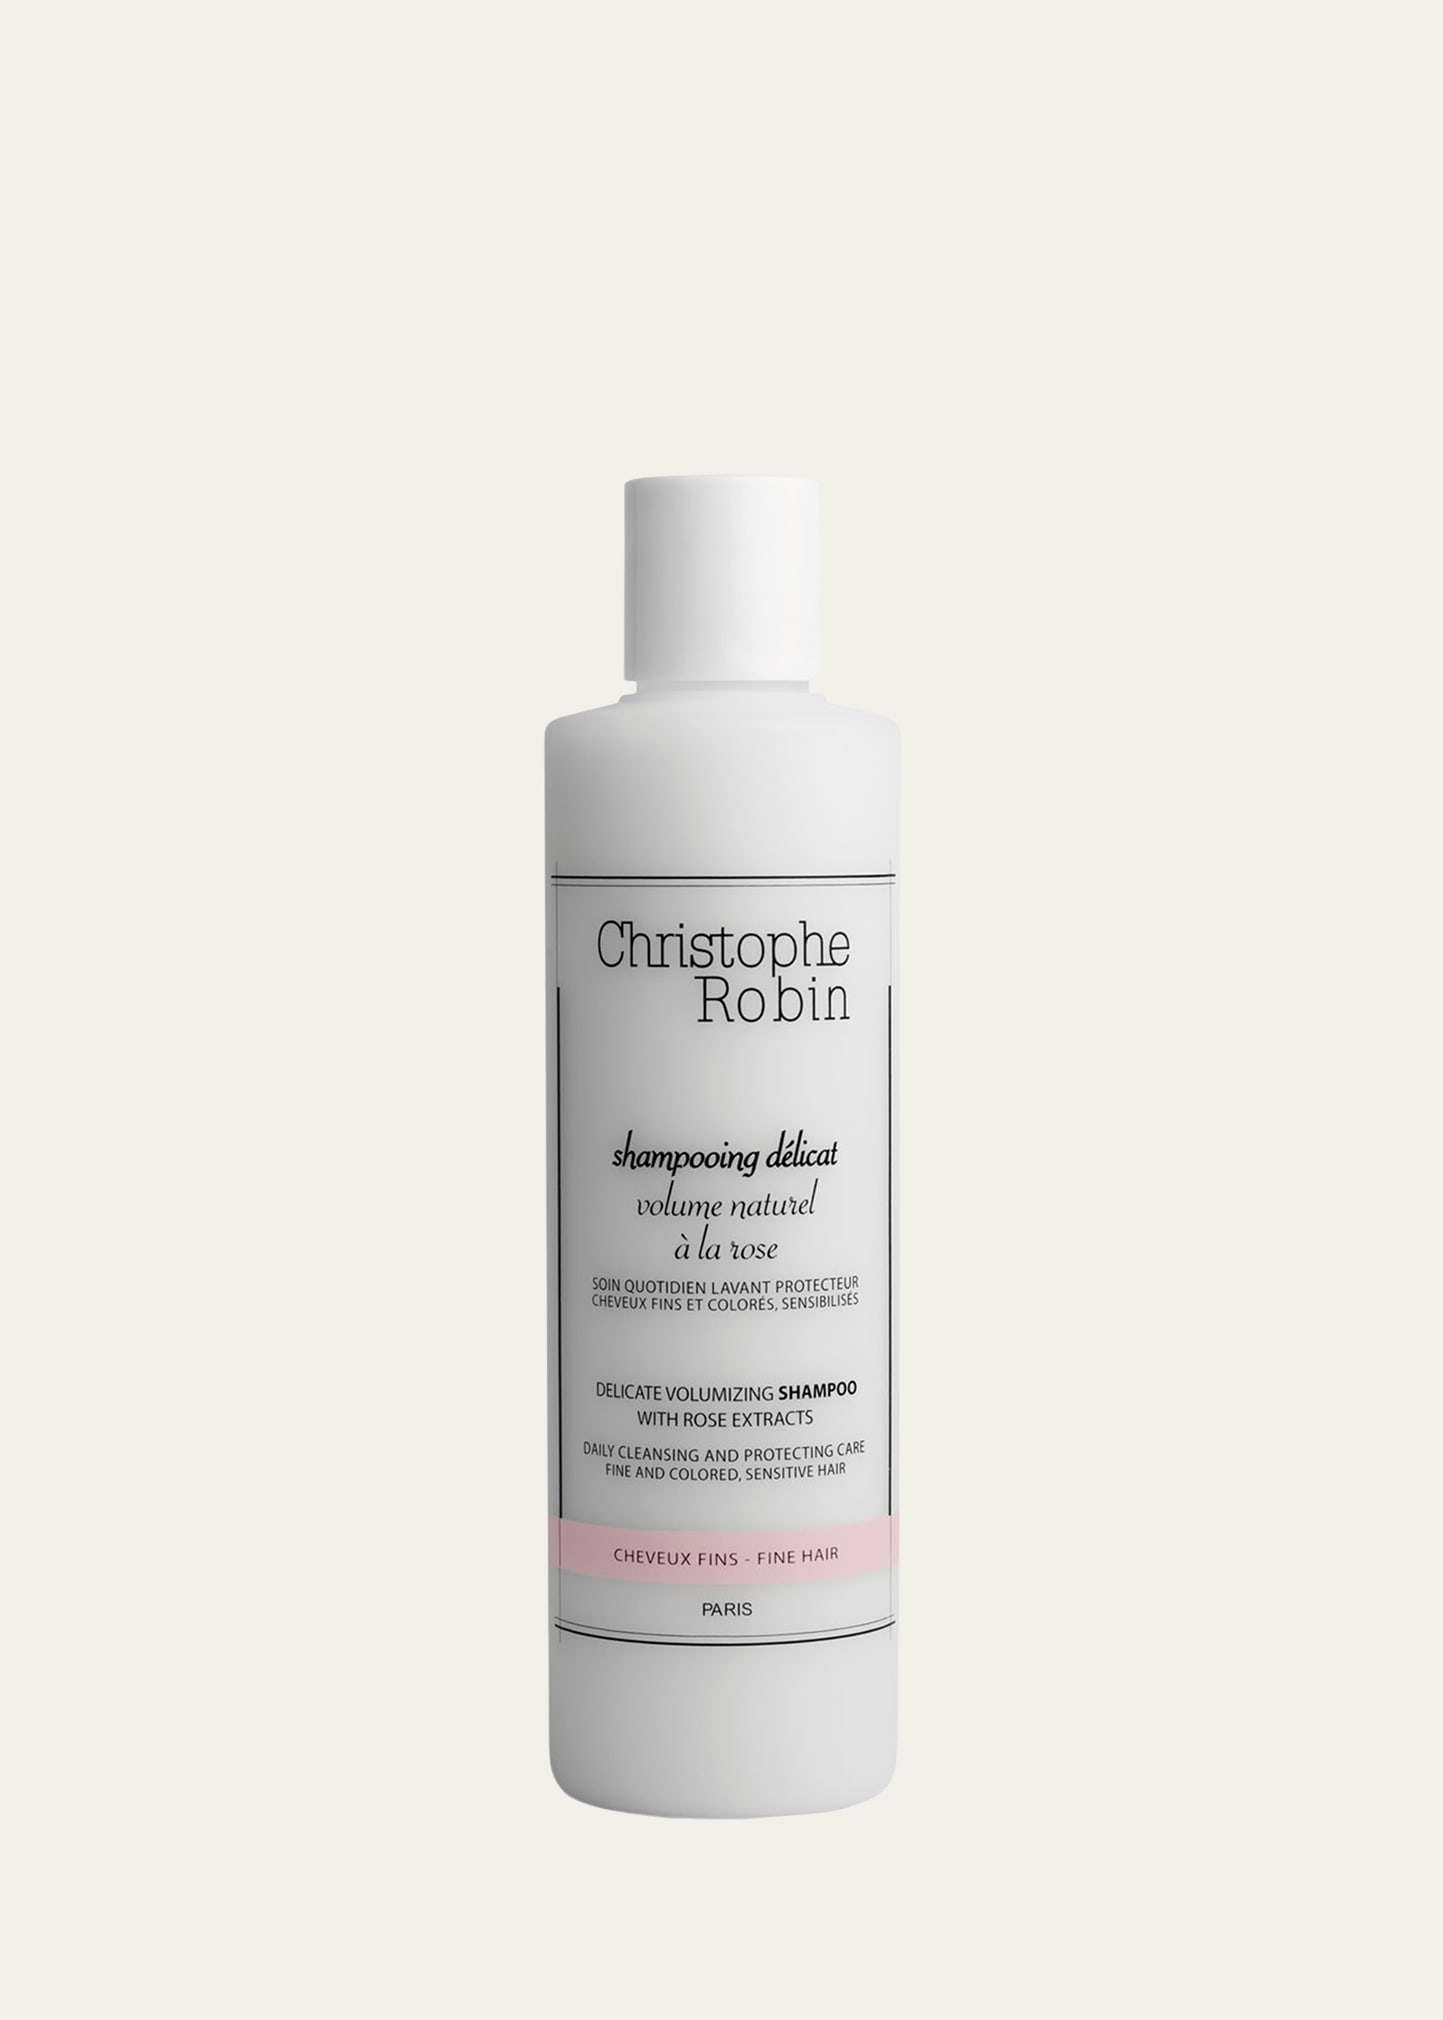 Christophe Robin Delicate Volumizing Shampoo with Rose Extracts, 8.4 oz./ 250 mL